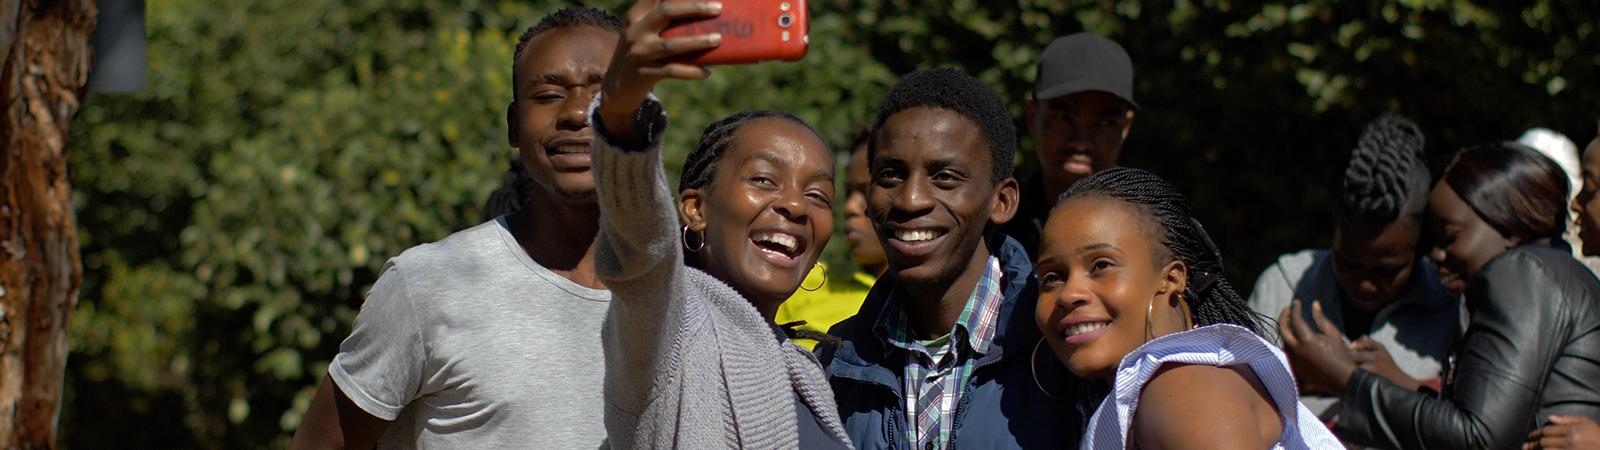 Group of young people taking a selfie